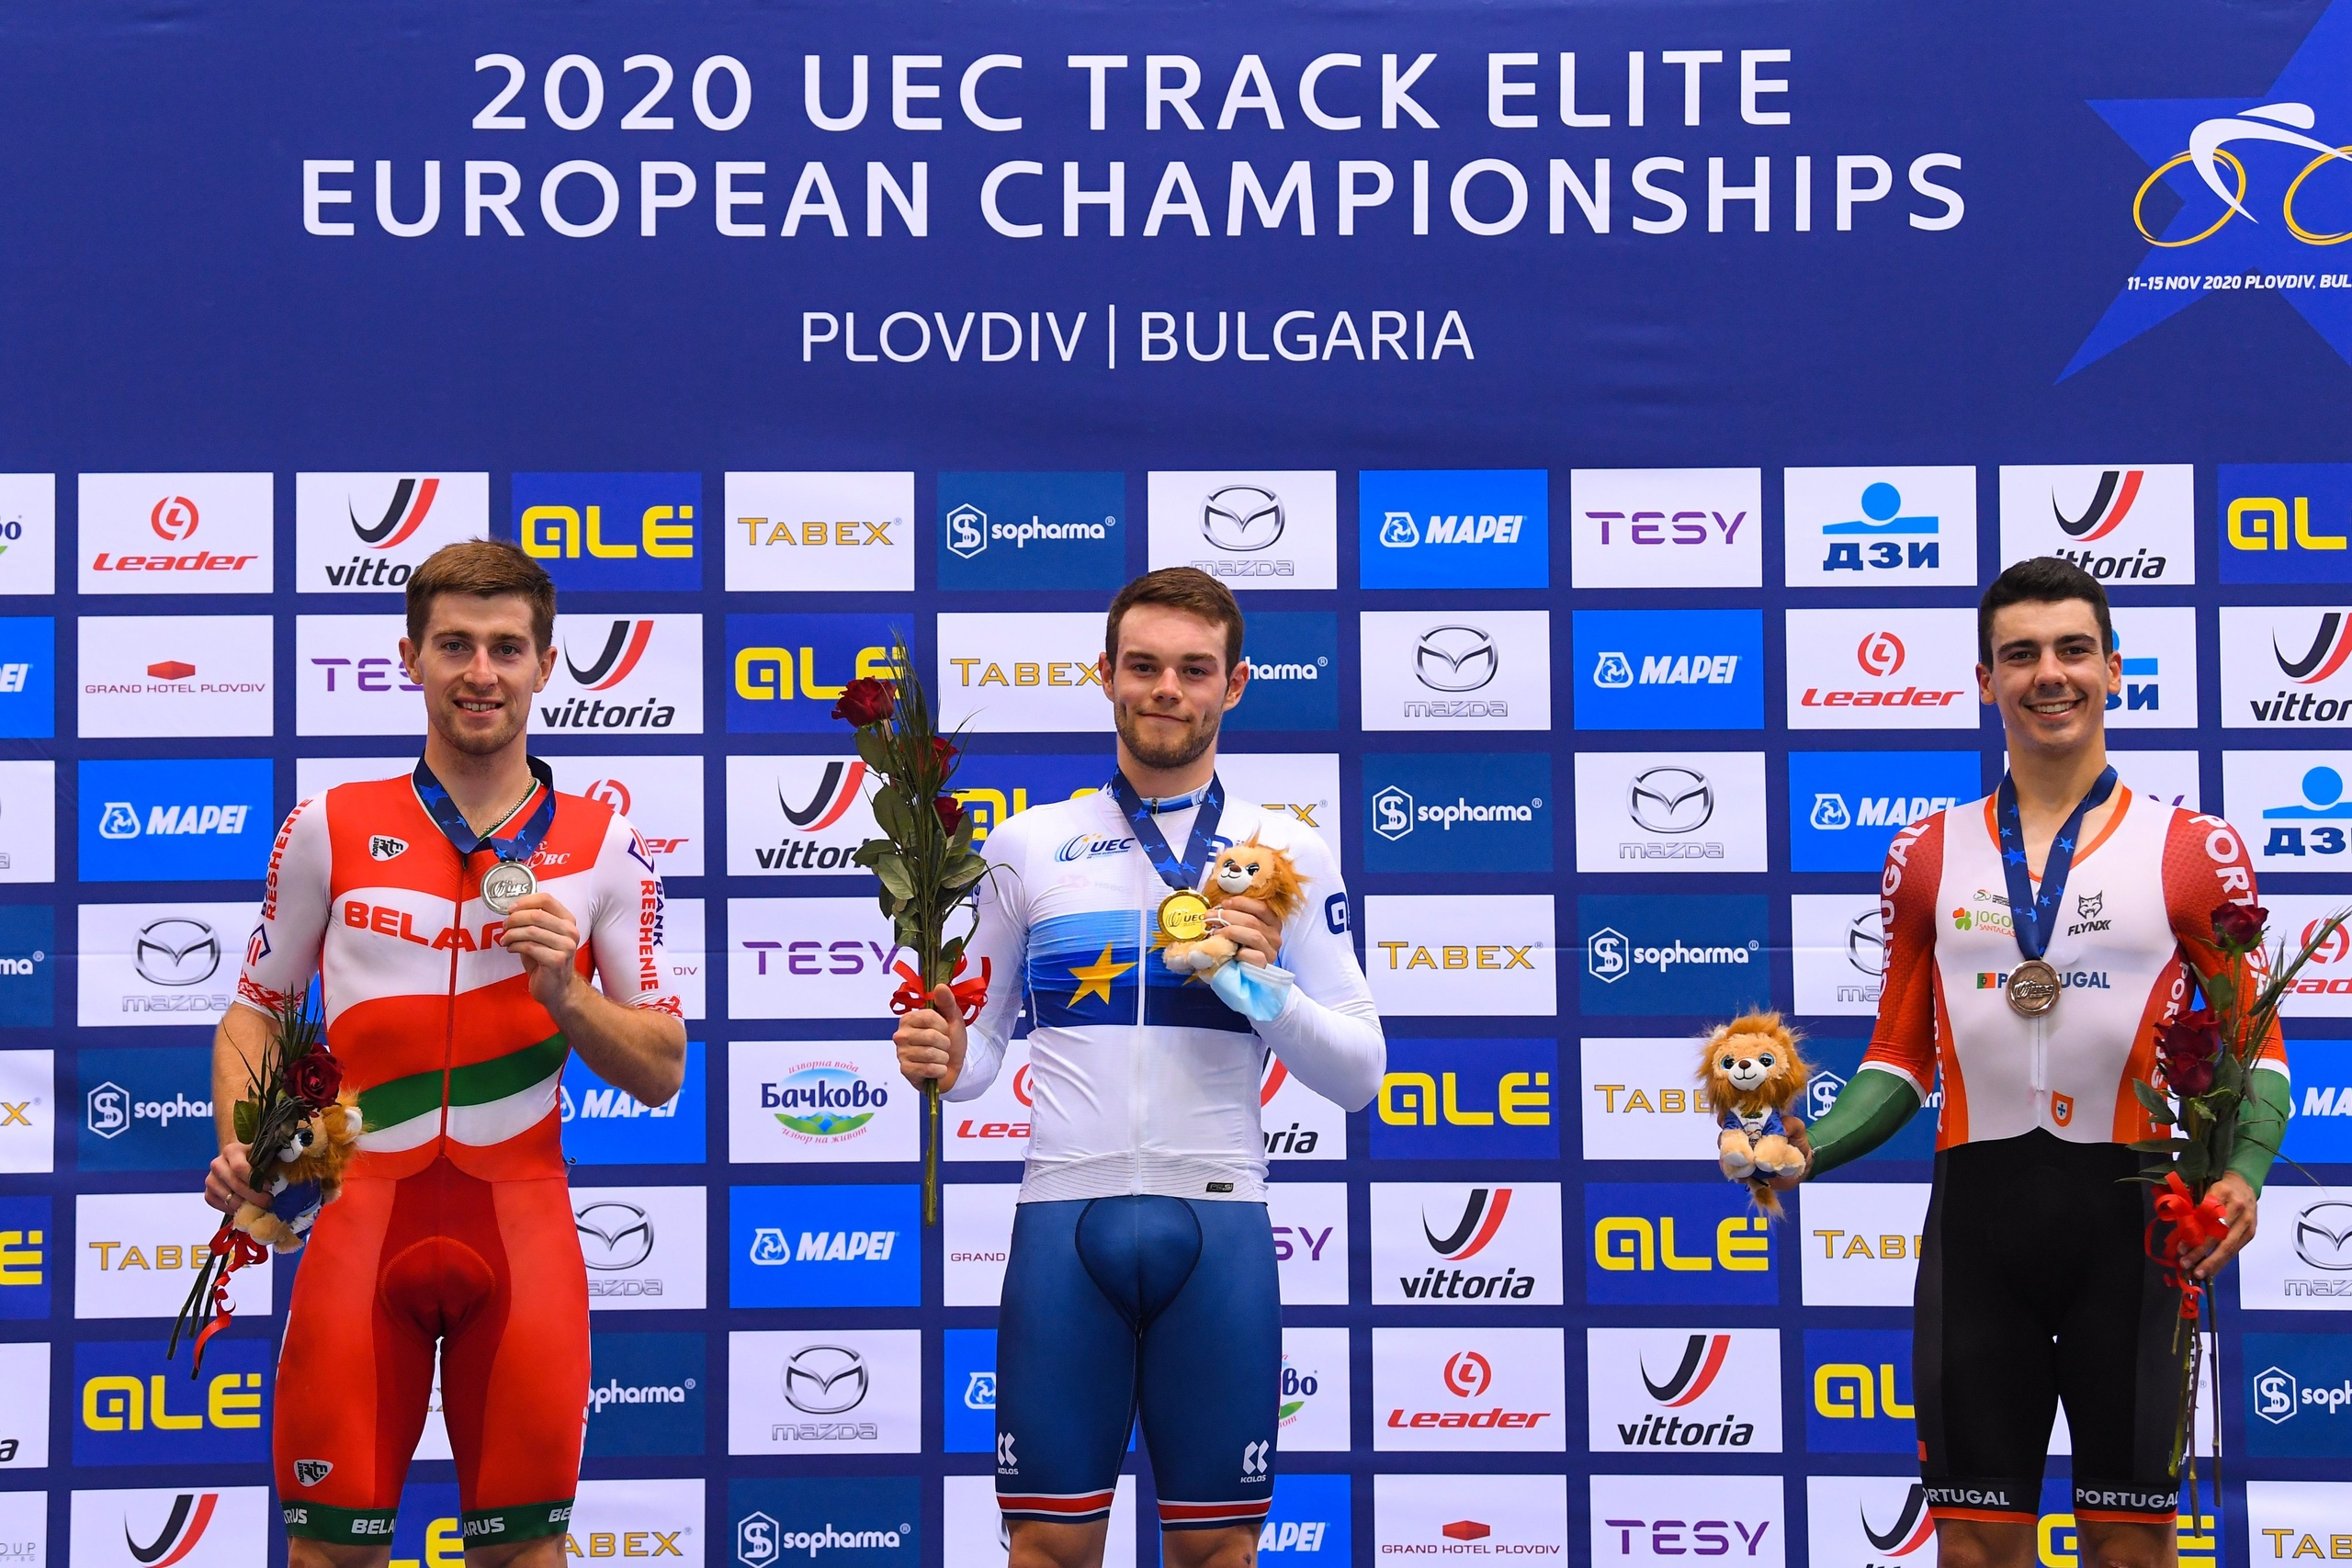 Results of the 2020 UEC European Track Championships